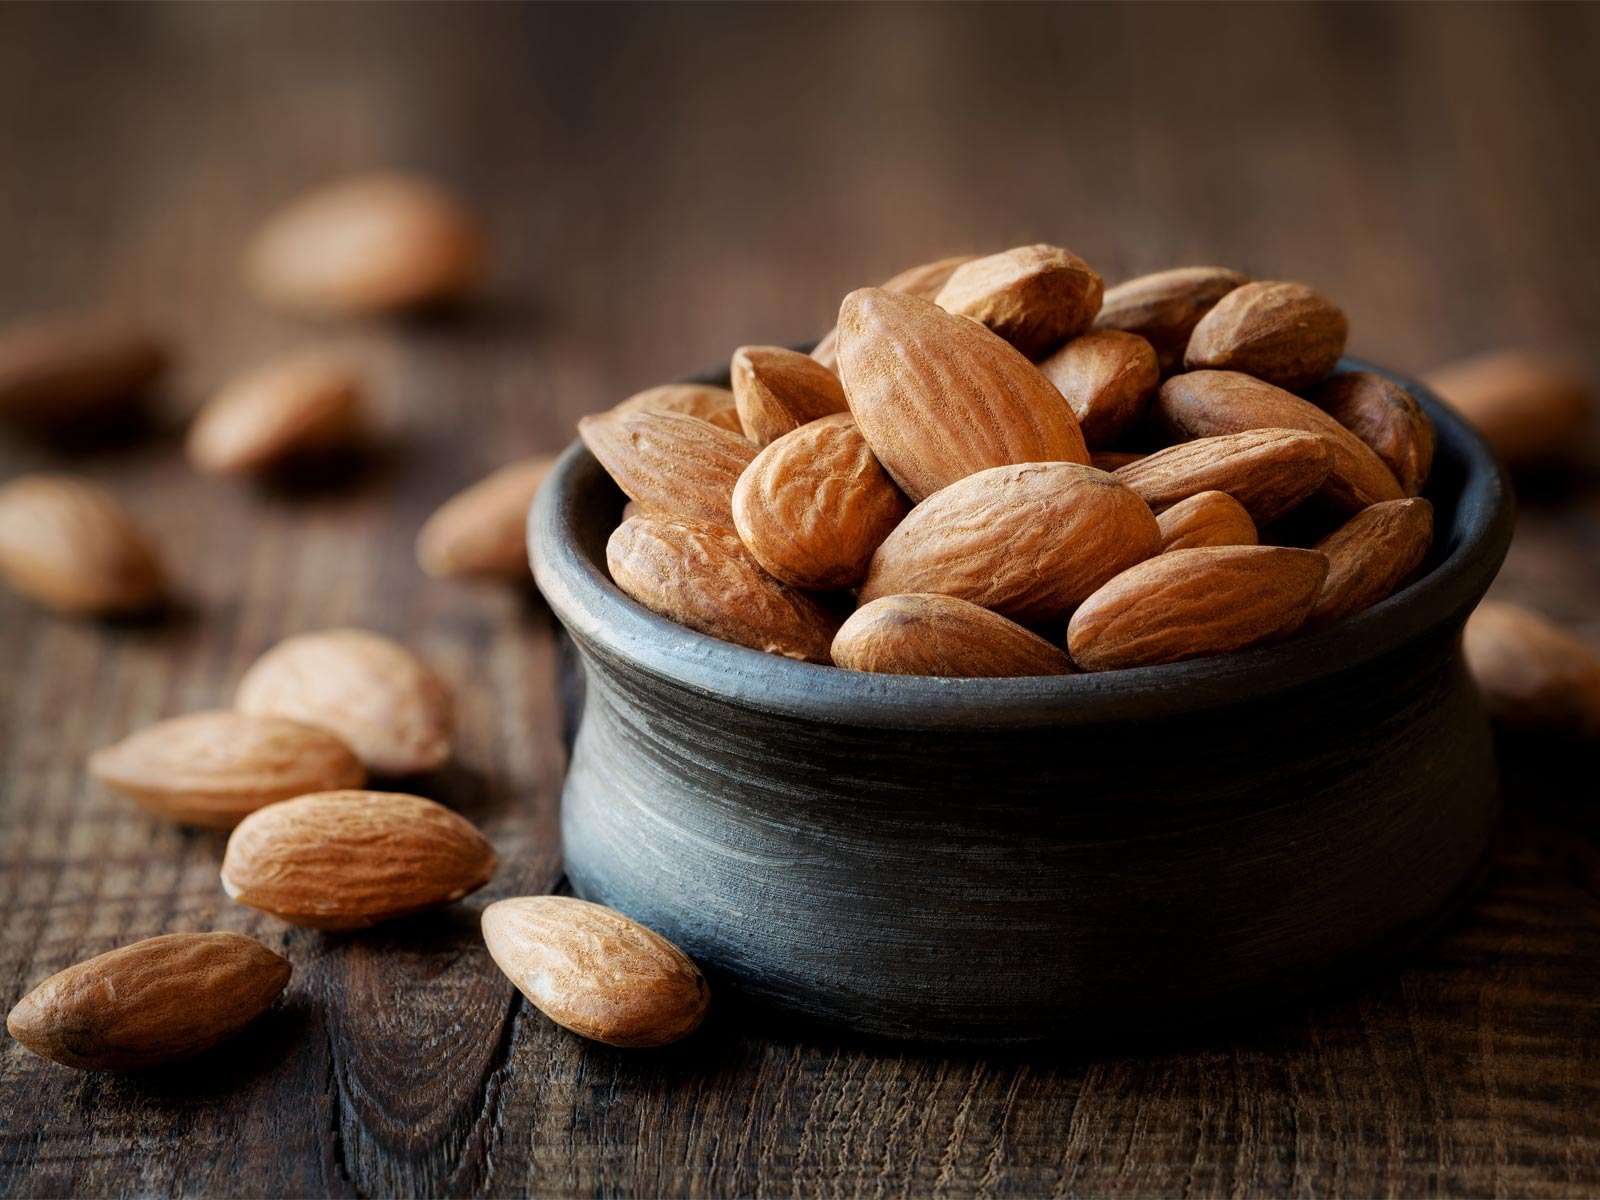 Almonds for Prostate Health (And How Much to Eat to Ease BPH)